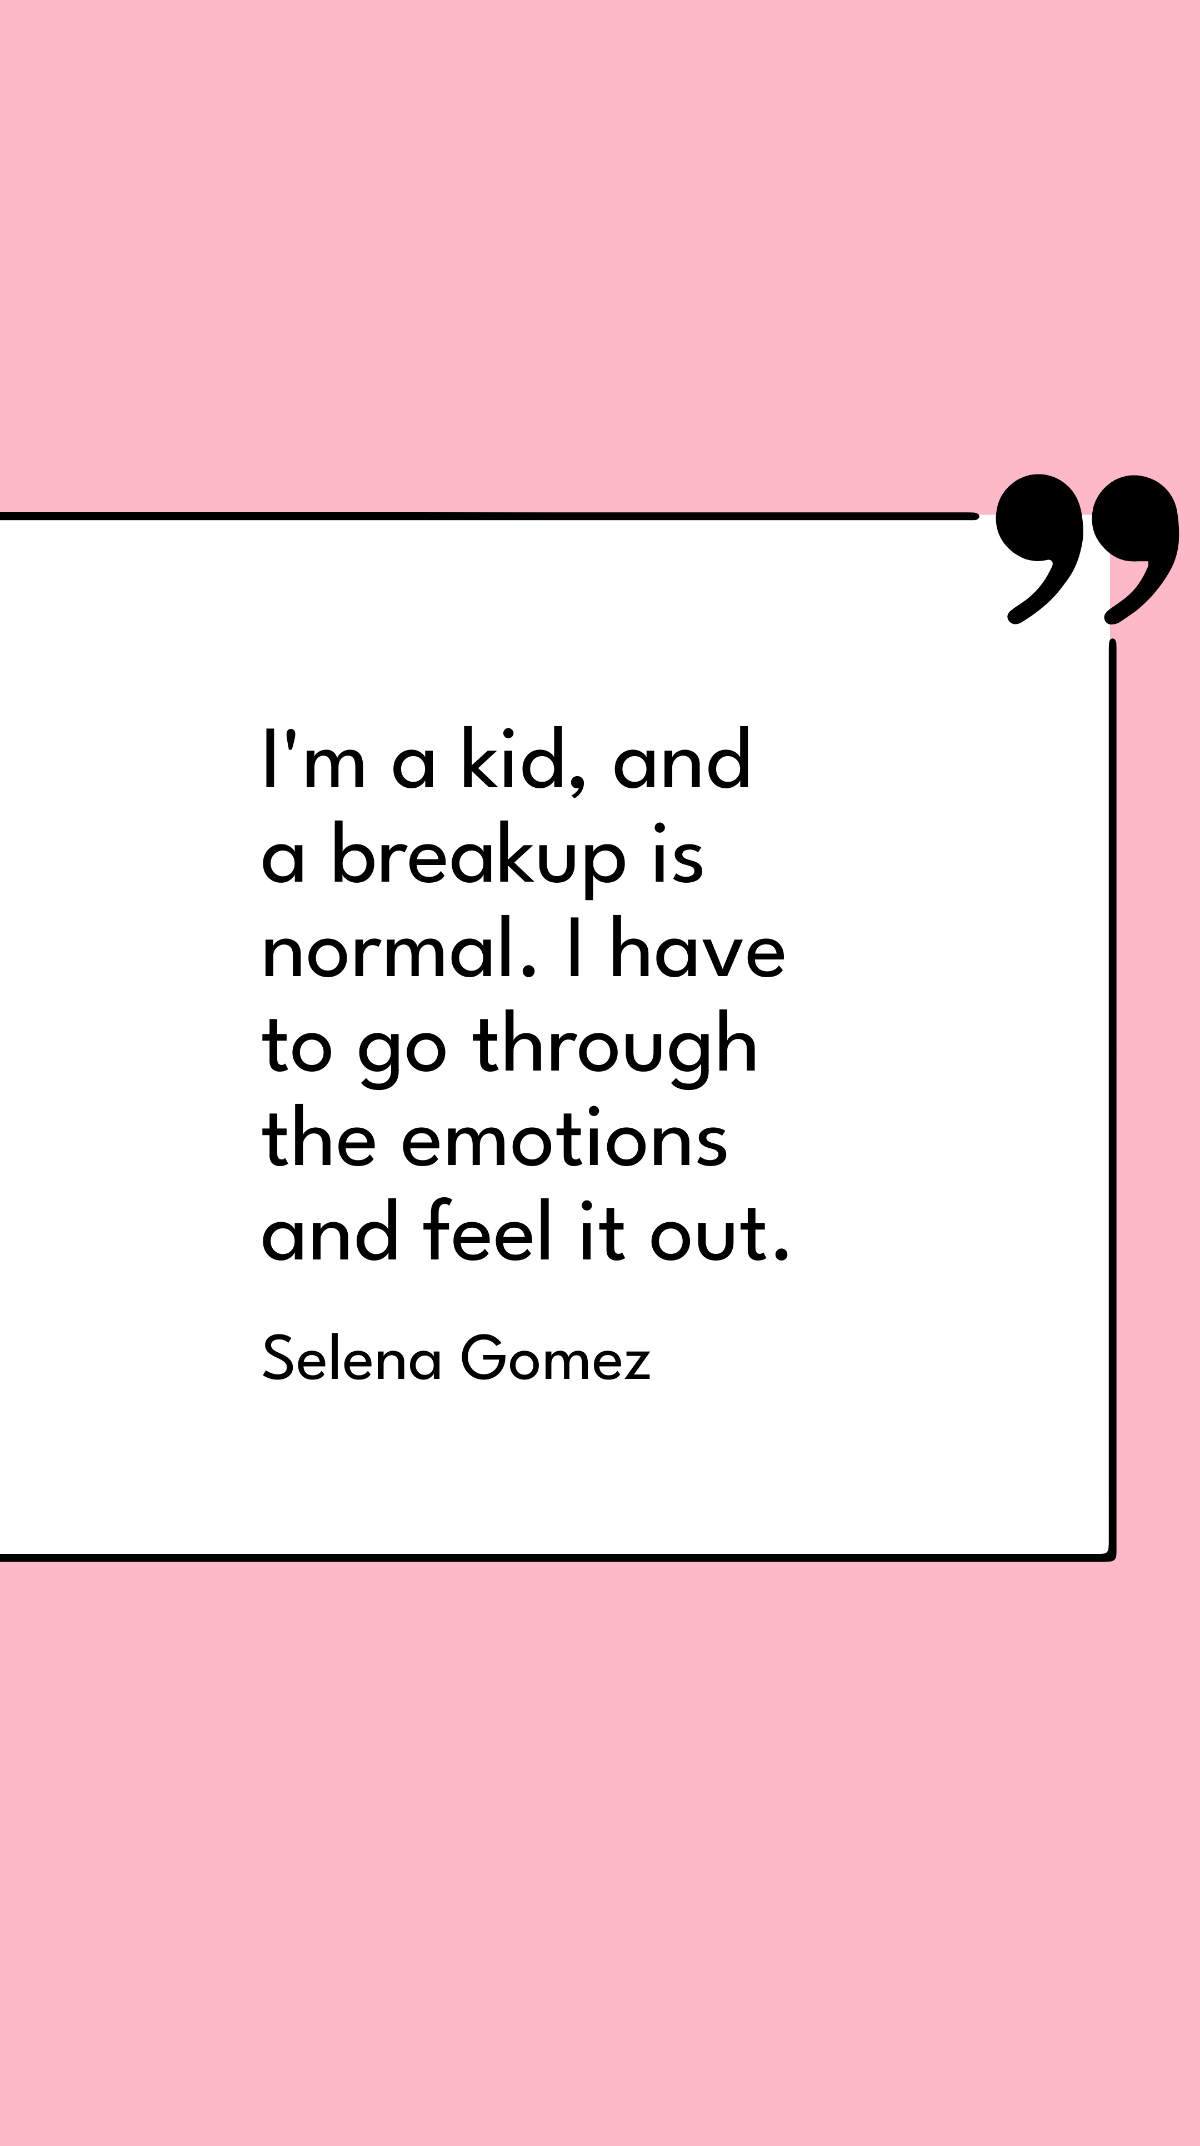 Selena Gomez - I'm a kid, and a breakup is normal. I have to go through the emotions and feel it out.